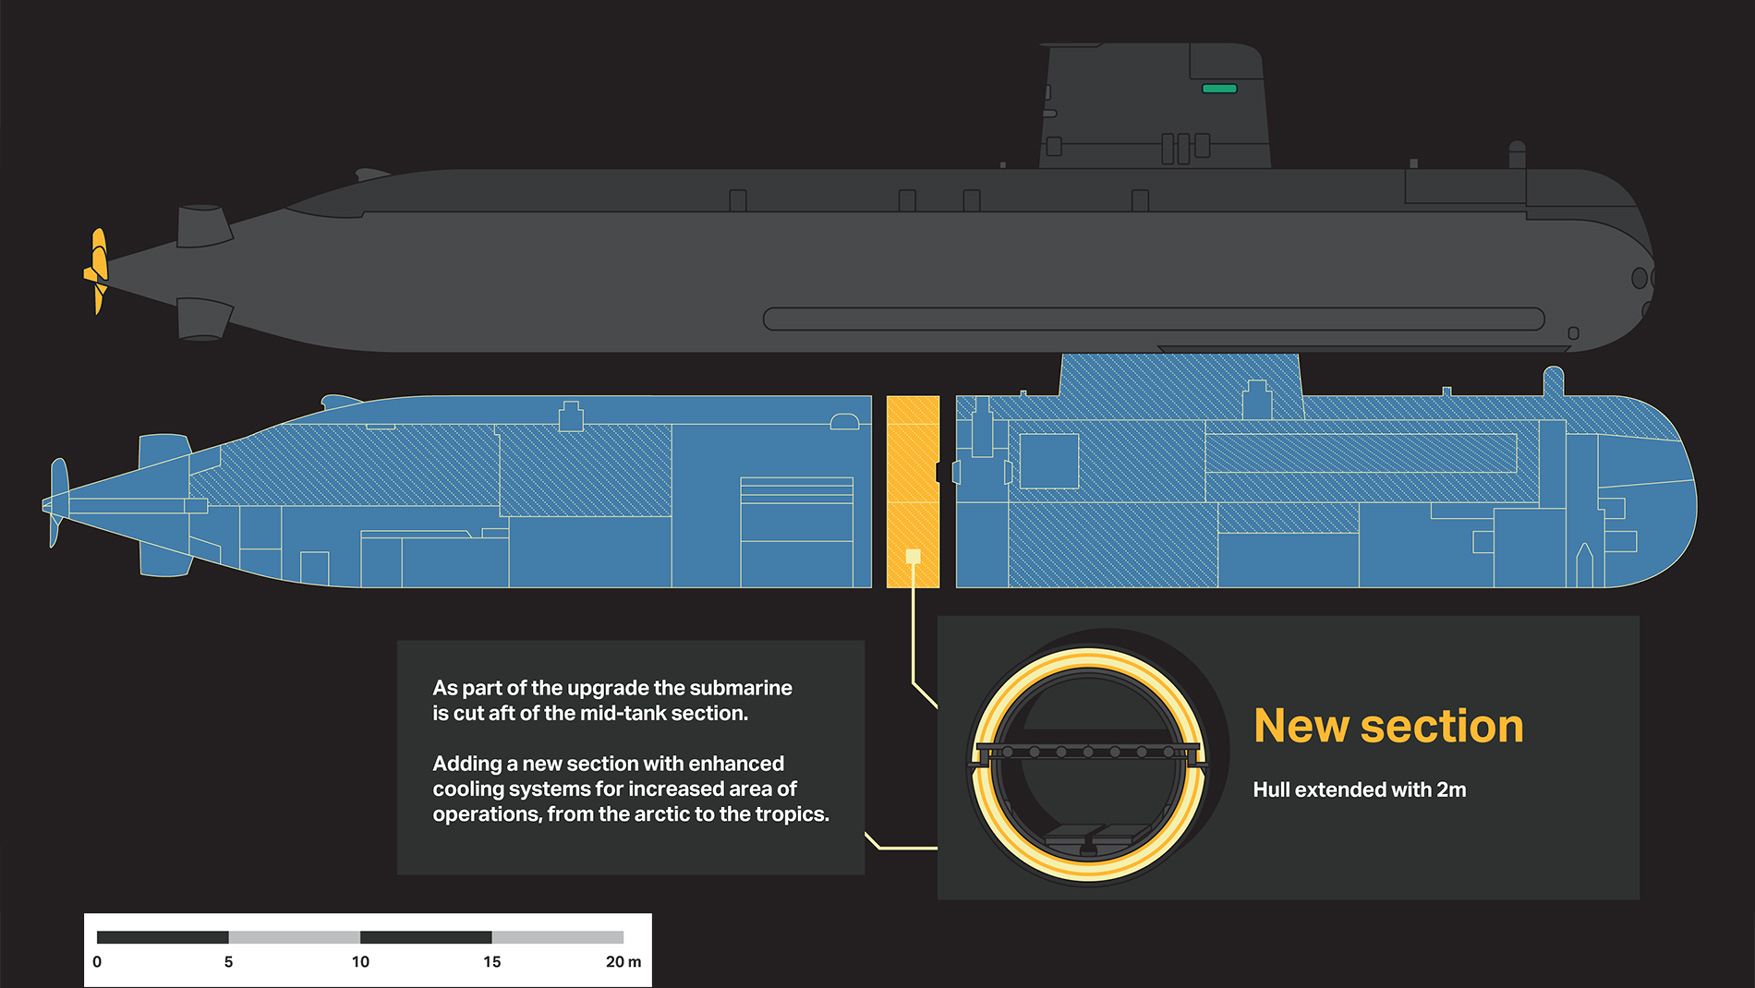 Sea trials commence of upgraded Gotland submarine